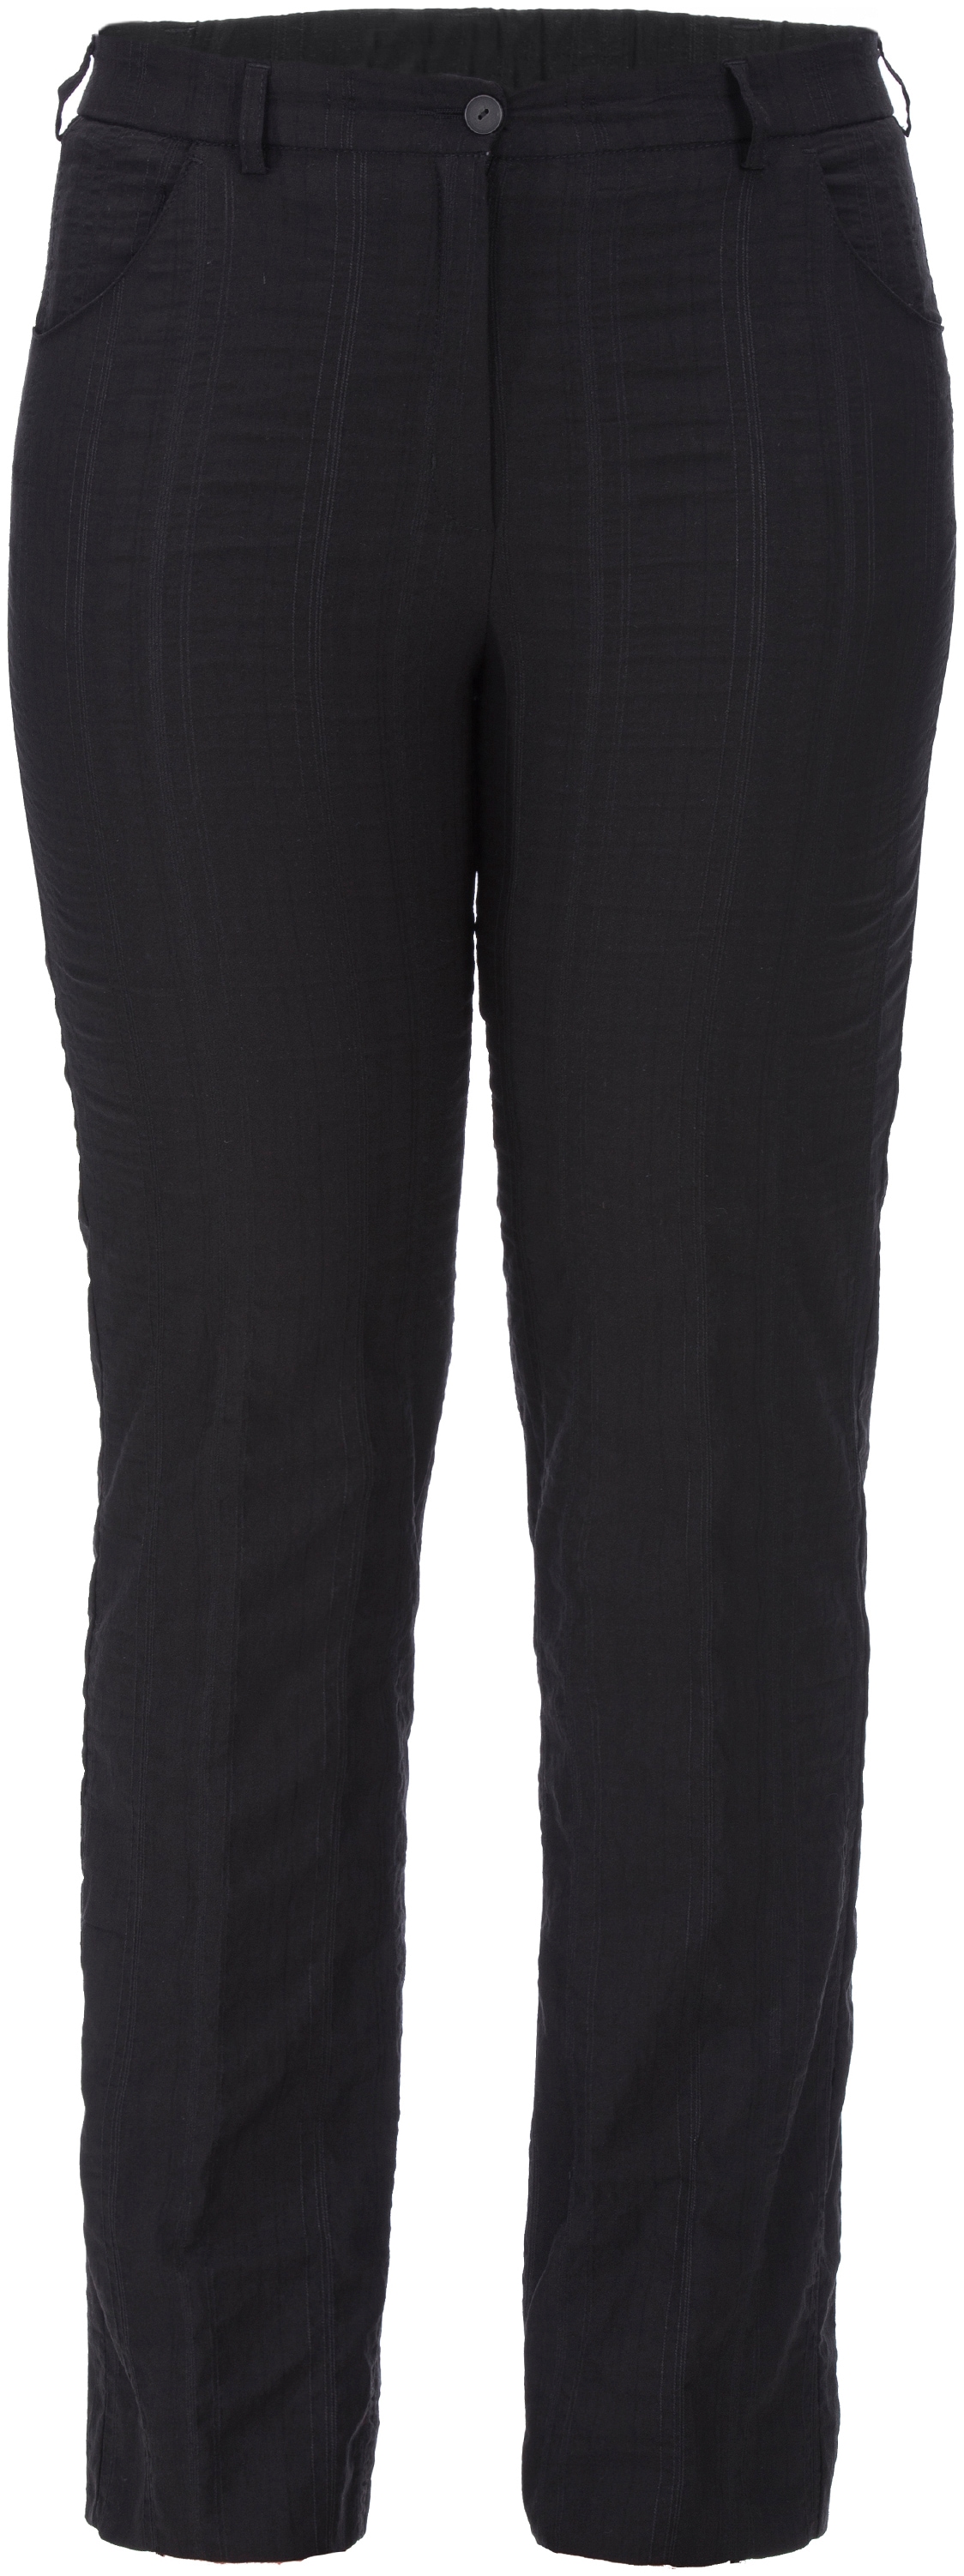 bei in optimale »Bea«, Quer-Stretch ♕ KjBRAND Passform Stoffhose